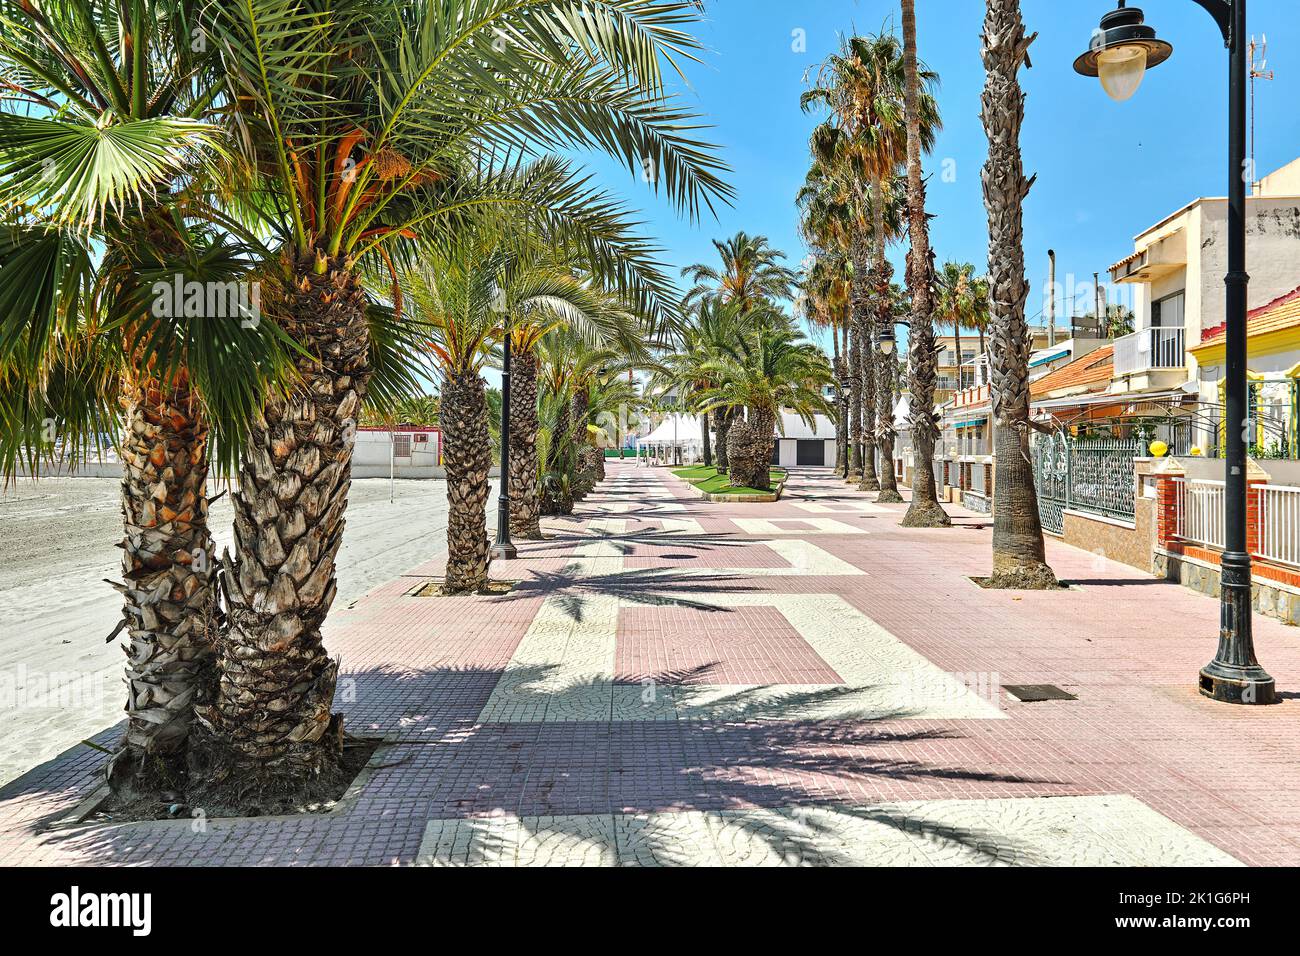 Sandy beach with palm trees and Mediterranean Sea view in the San Pedro del Pinatar, small town of Murcia, southeastern Spain Stock Photo